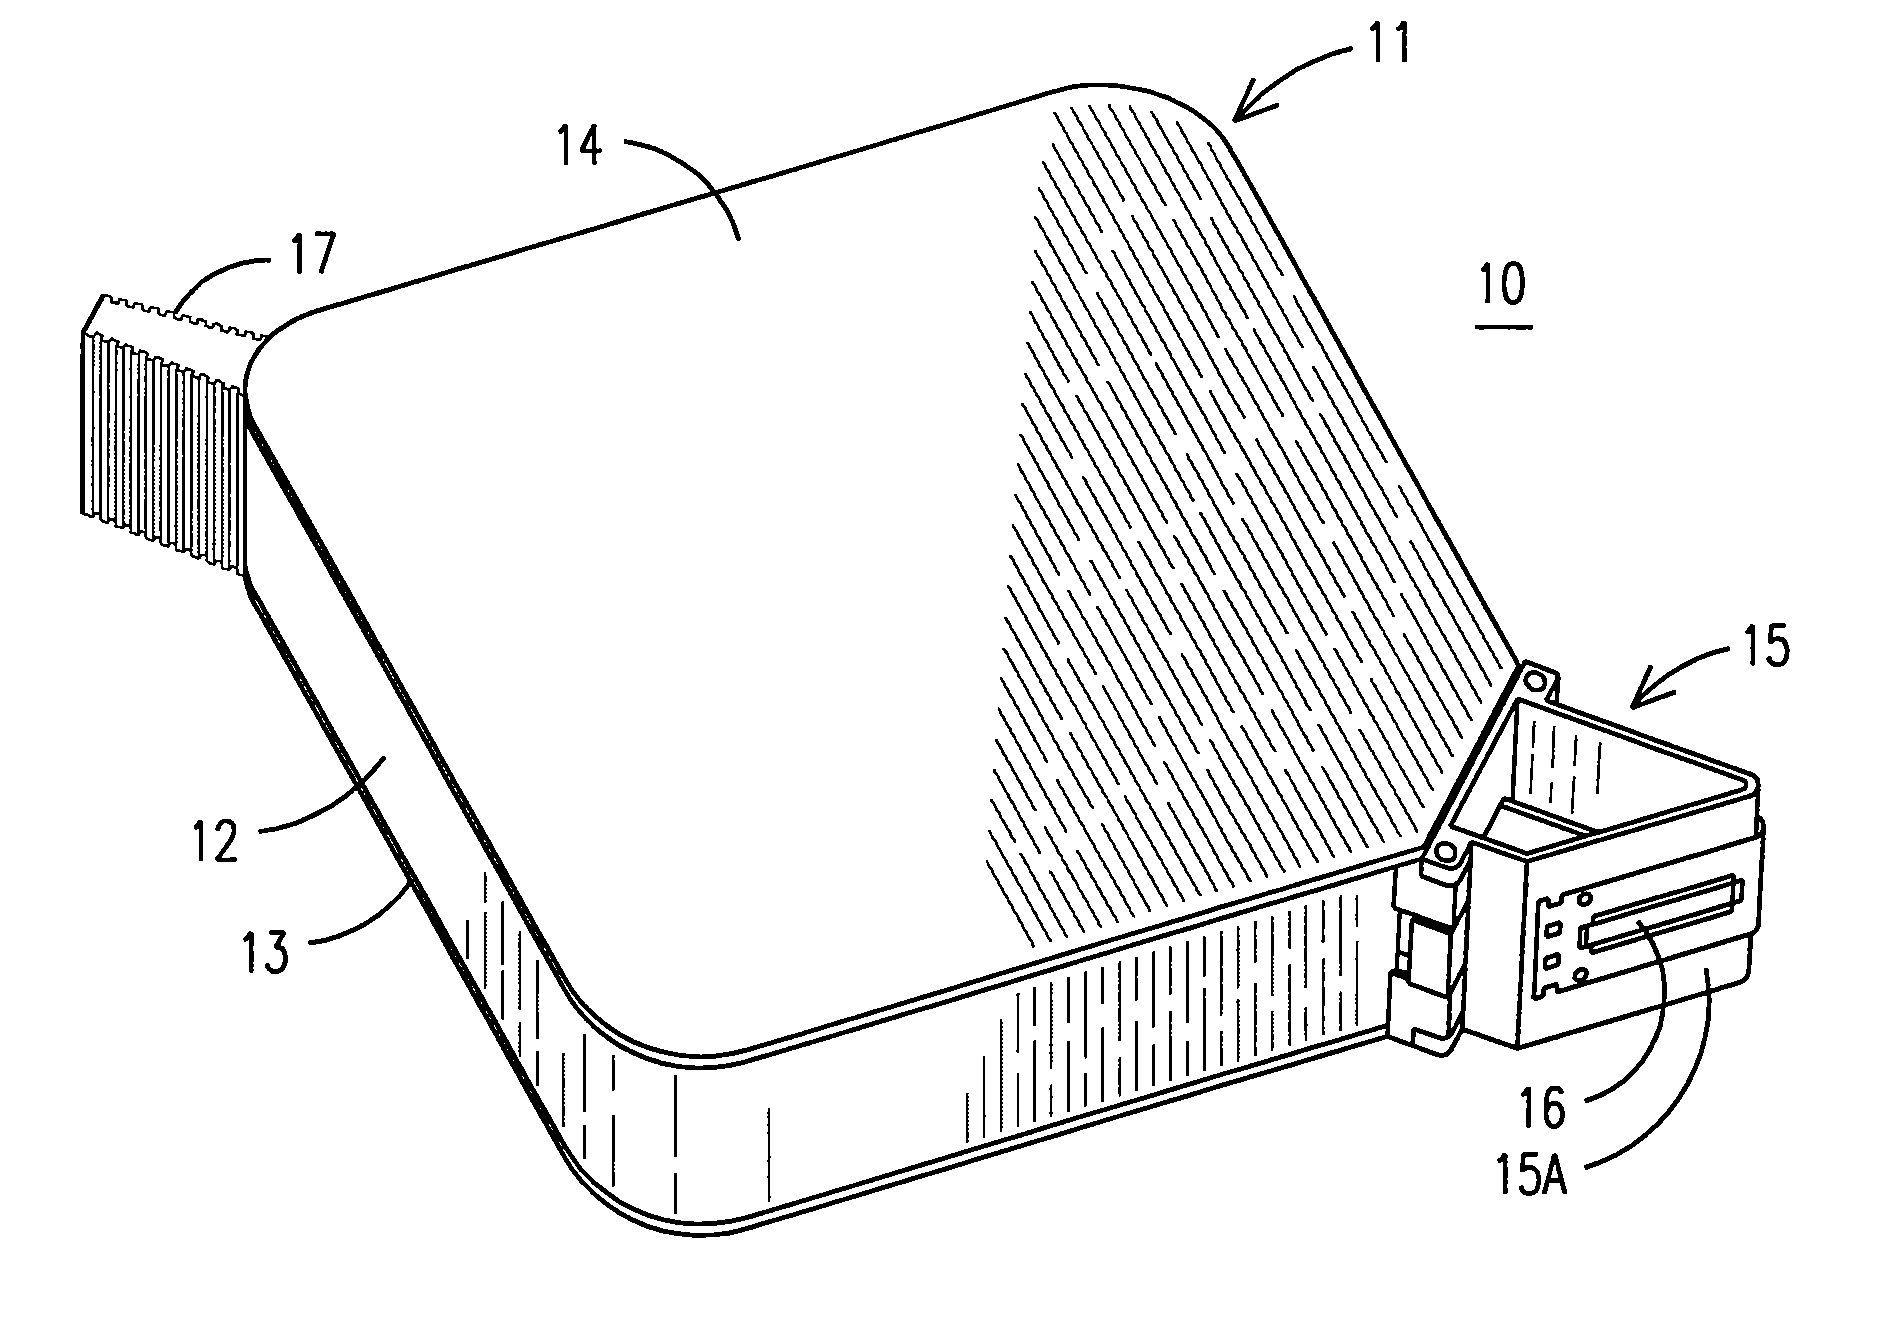 Ink Containment System and Ink Level Sensing System for an Inkjet Cartridge